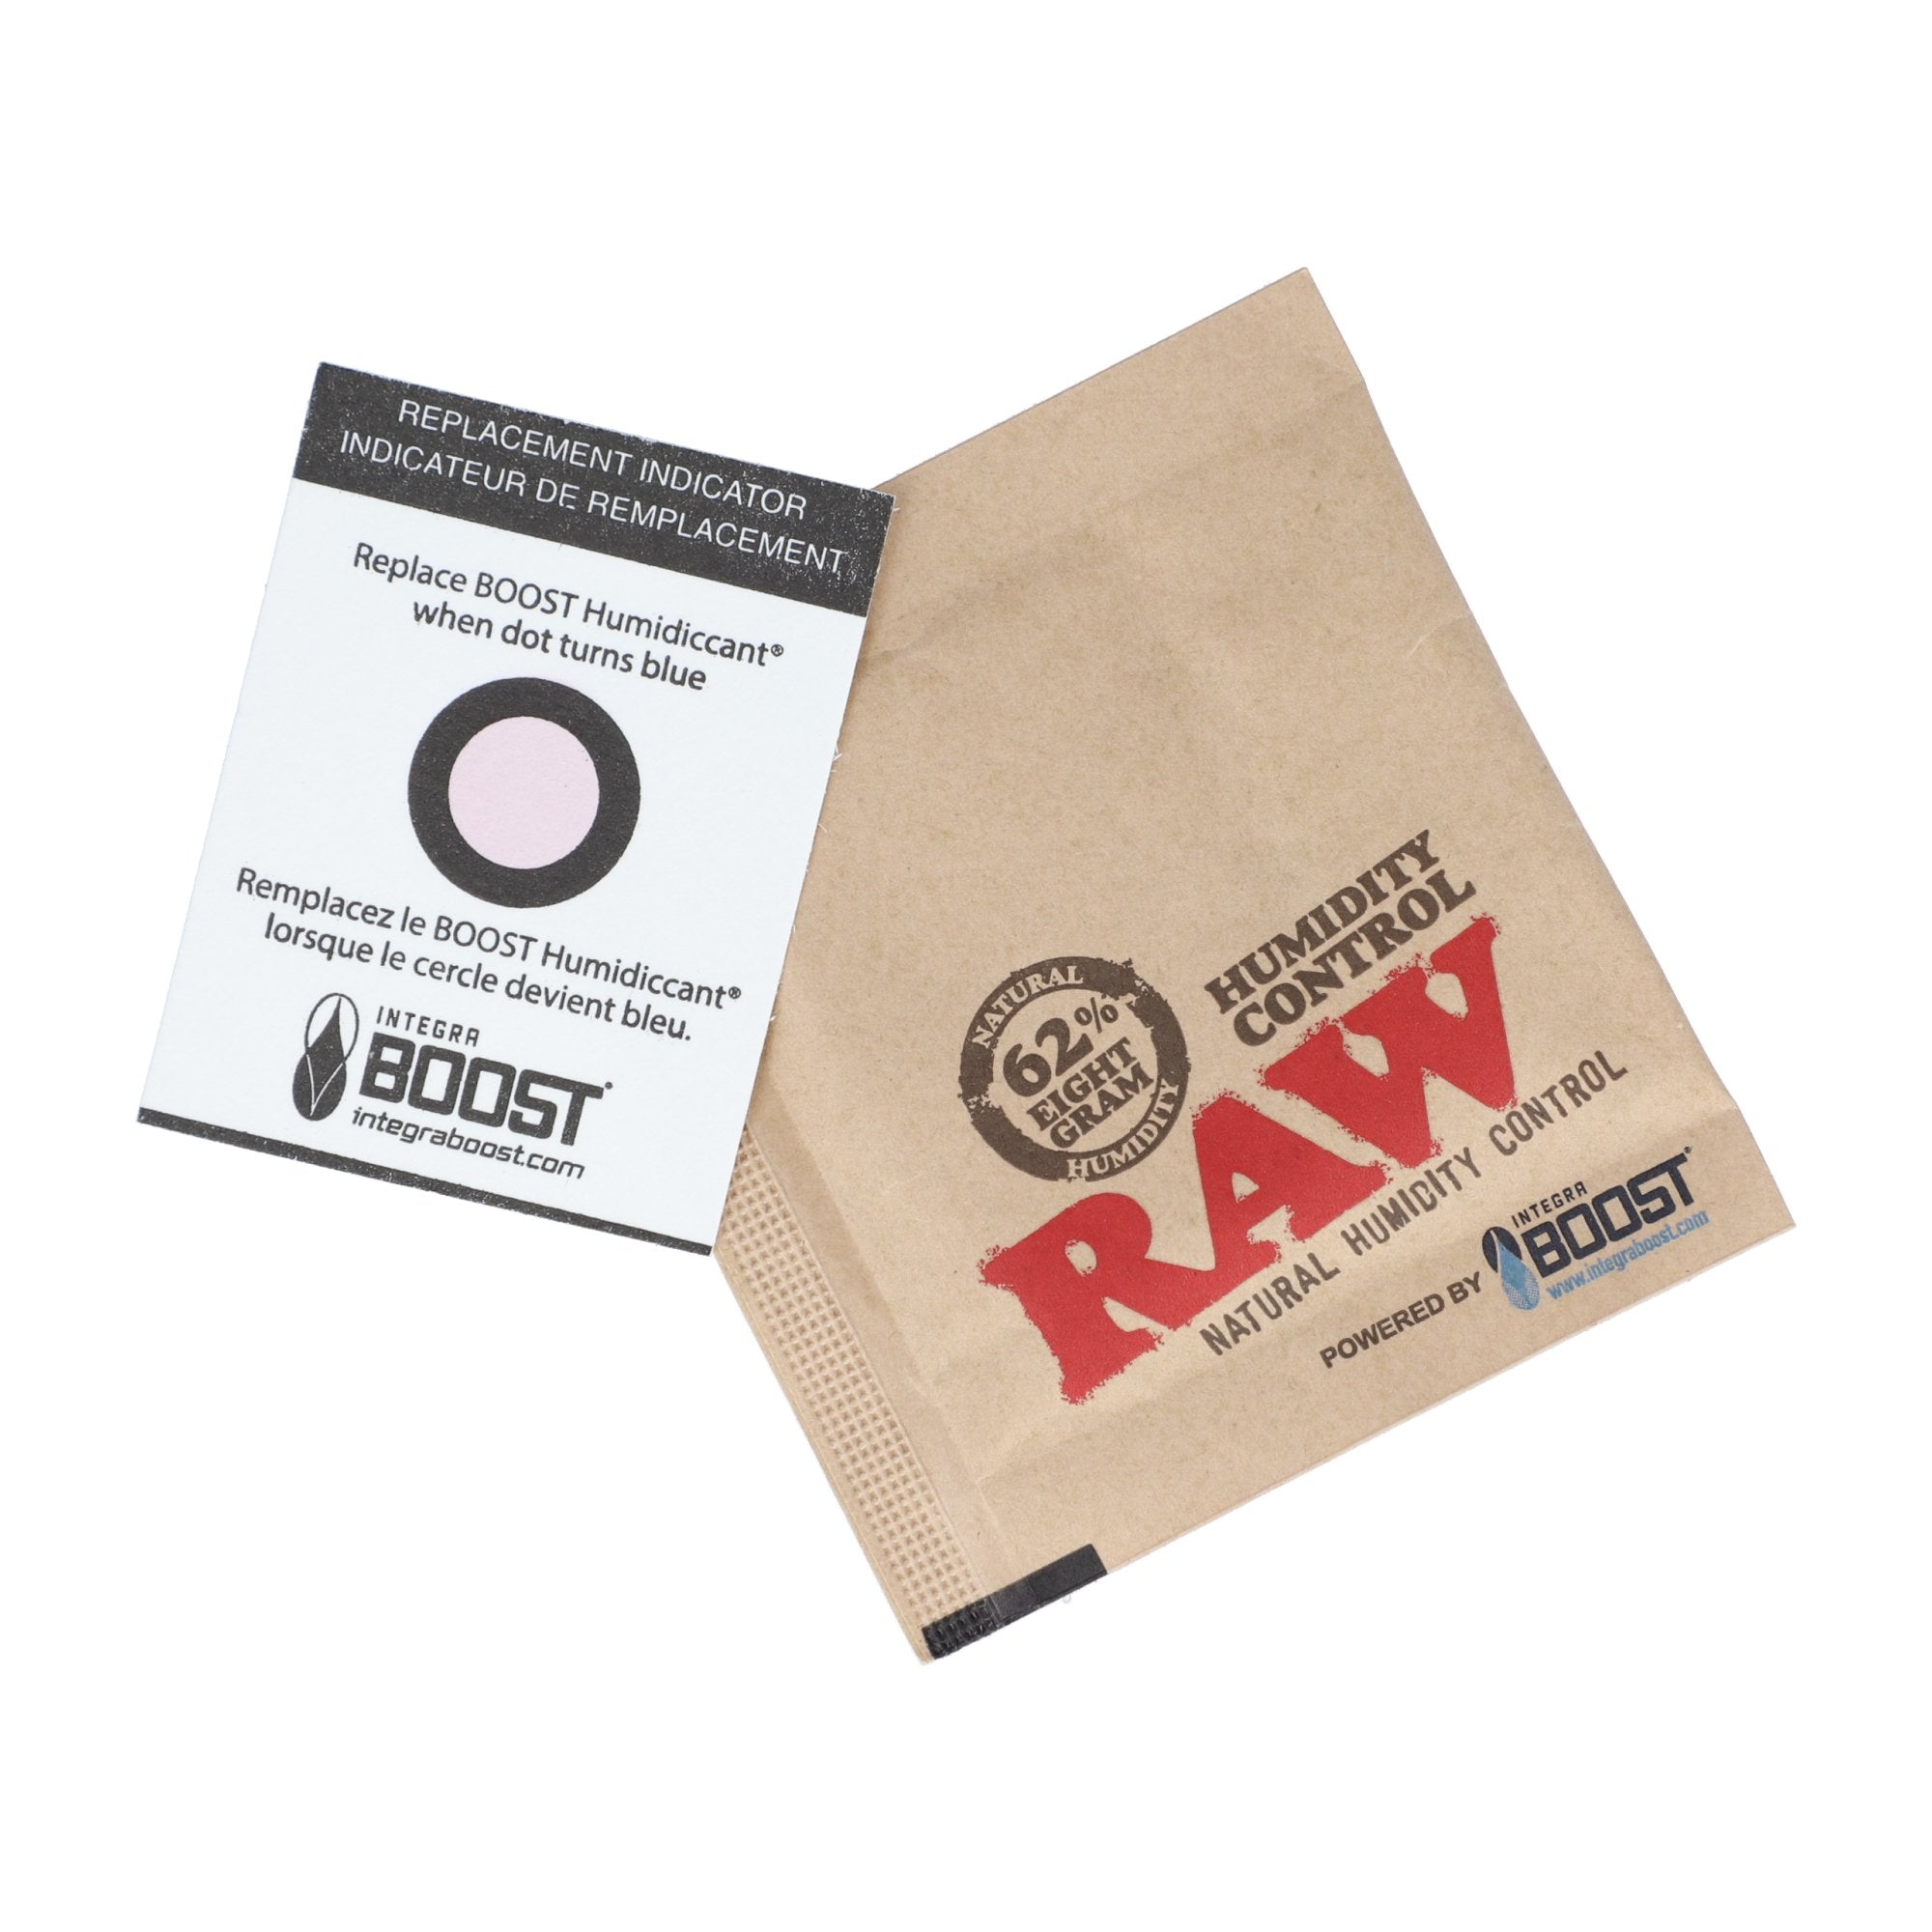 RAW 62% Humidity Control Pack 8-67 gram - ESD Official